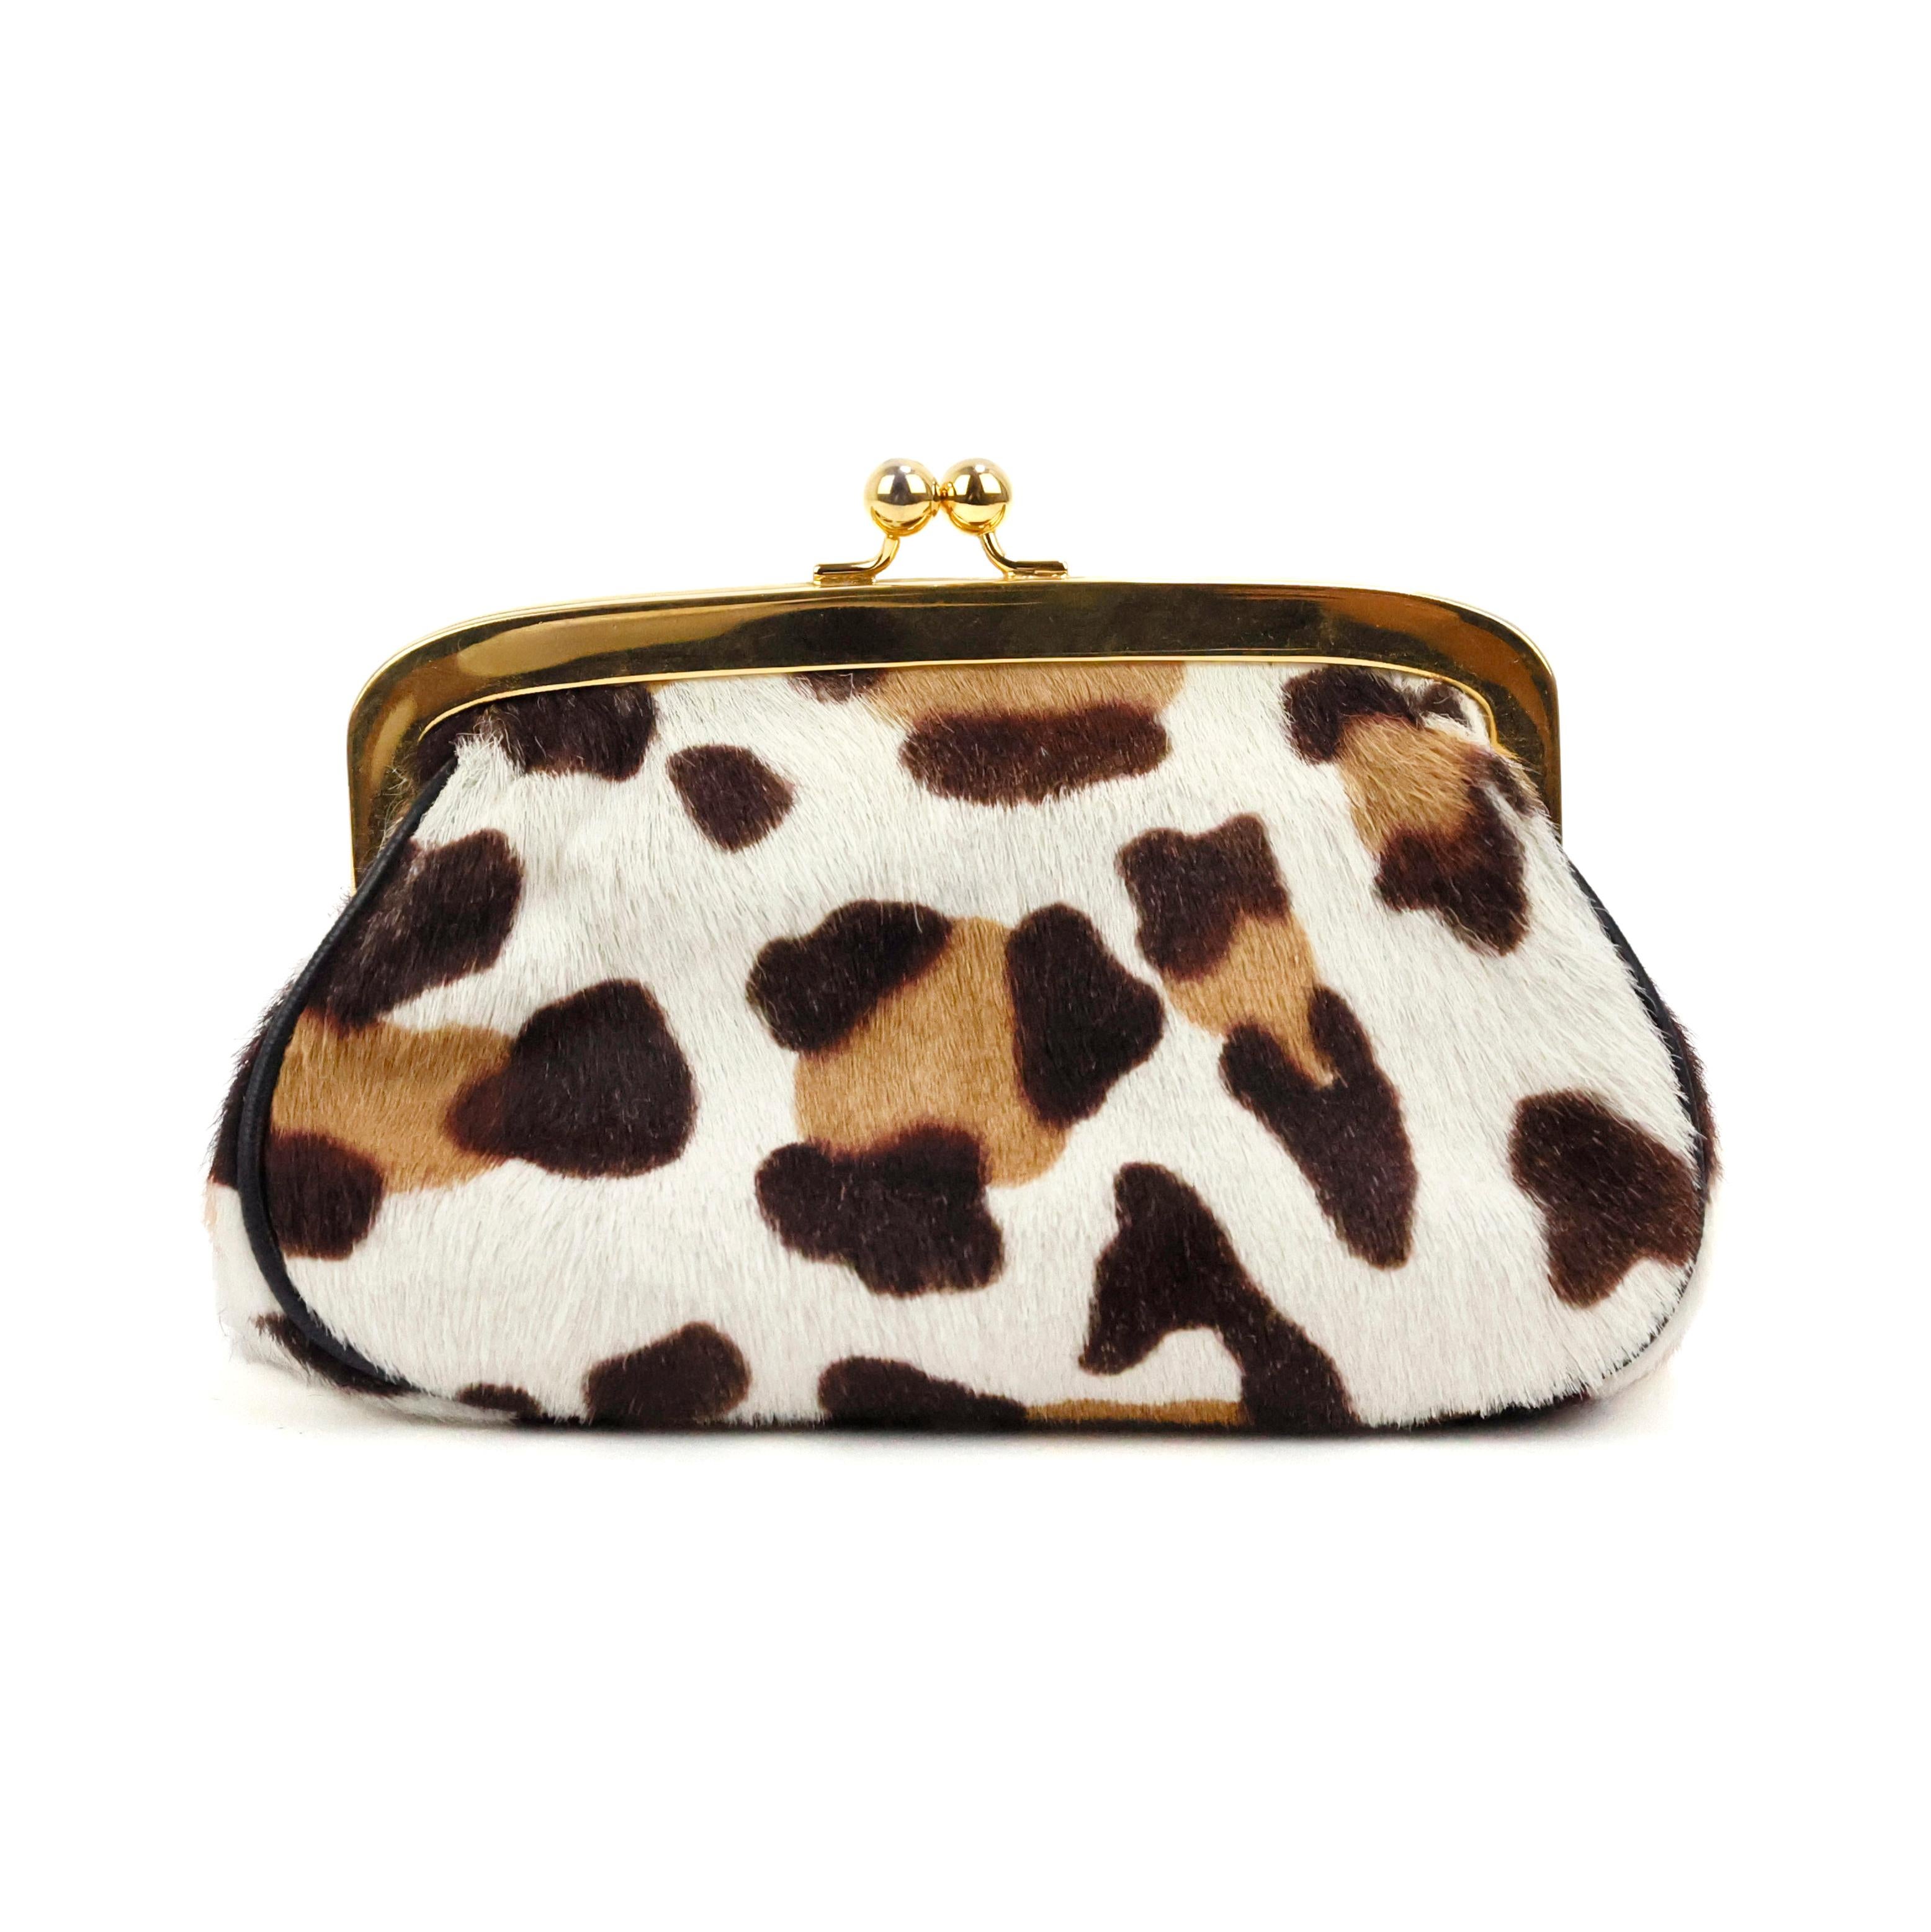 Prada coin pouch in pony hair calfskin leopard print, gold hardware.

Condition:
Really good. Slight scratches on the hardware.

Packing/accessories:
Dustbag.

Measuremets:
14cm x 9cm x 5cm